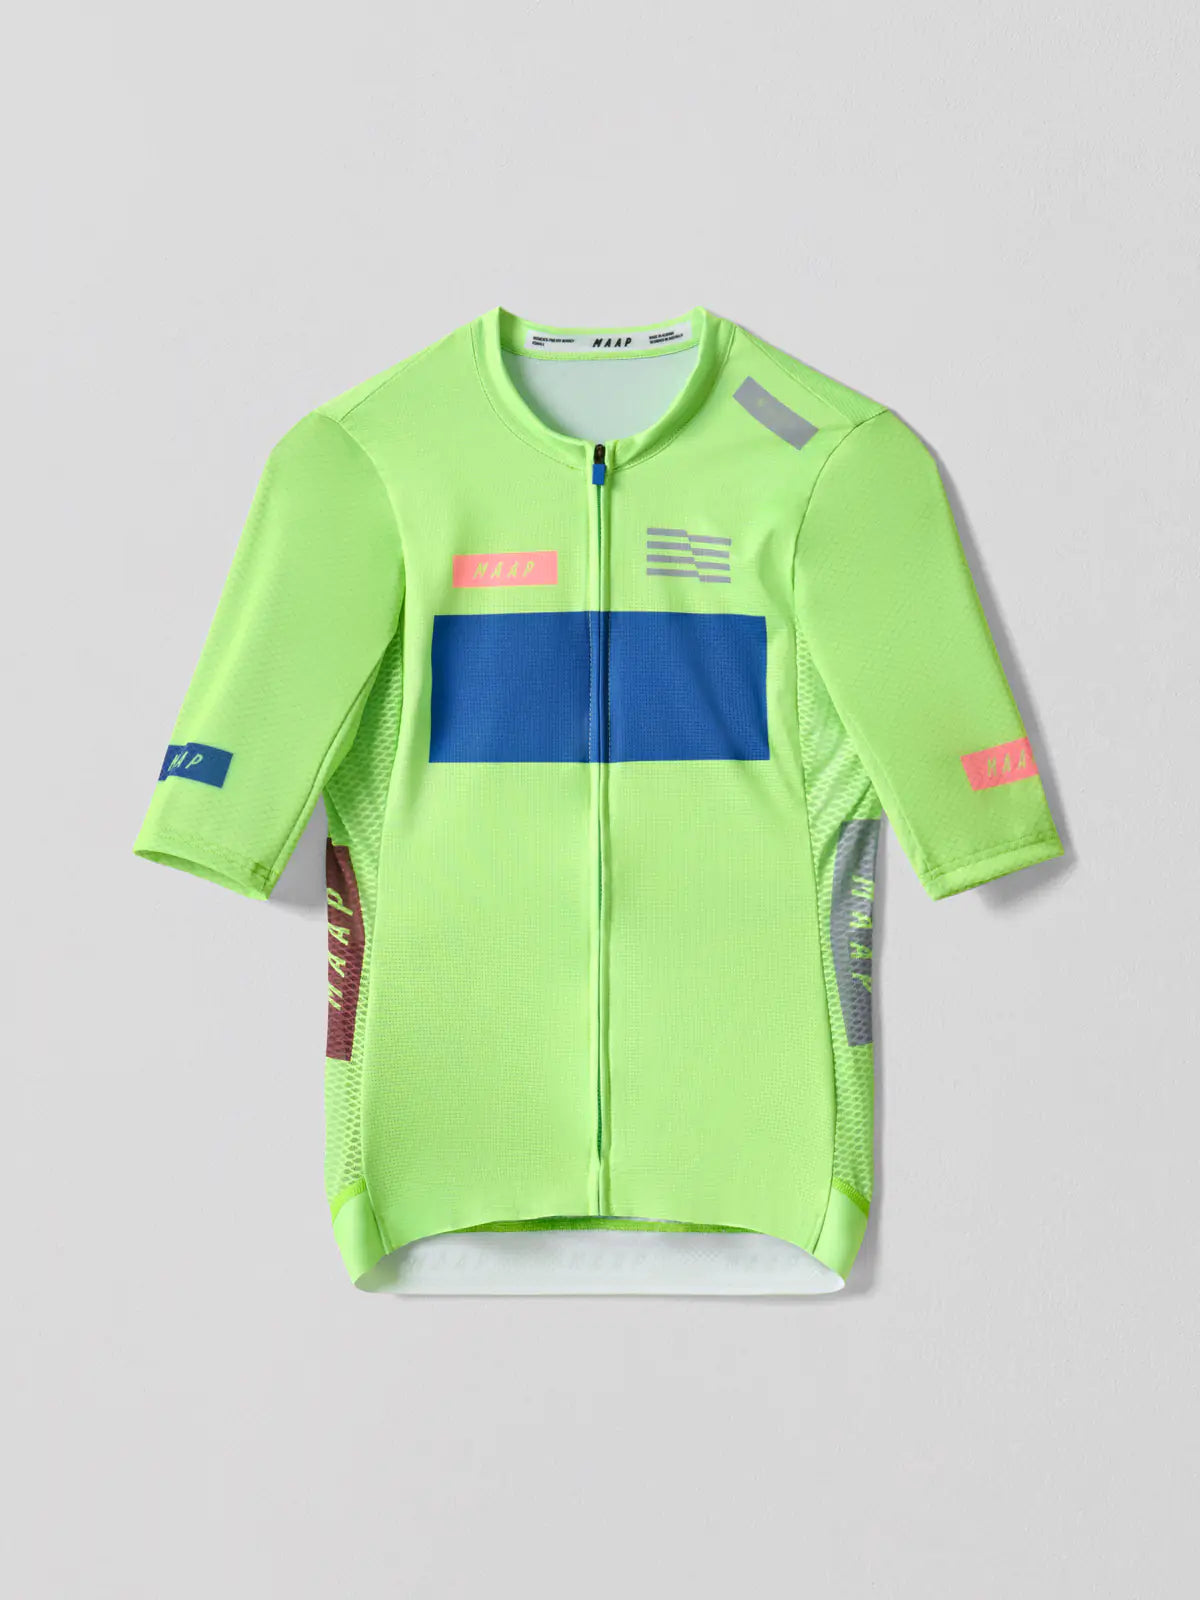 MAAP System Pro Air Jersey Glow レディース サイクル ジャージ | CYCLISM